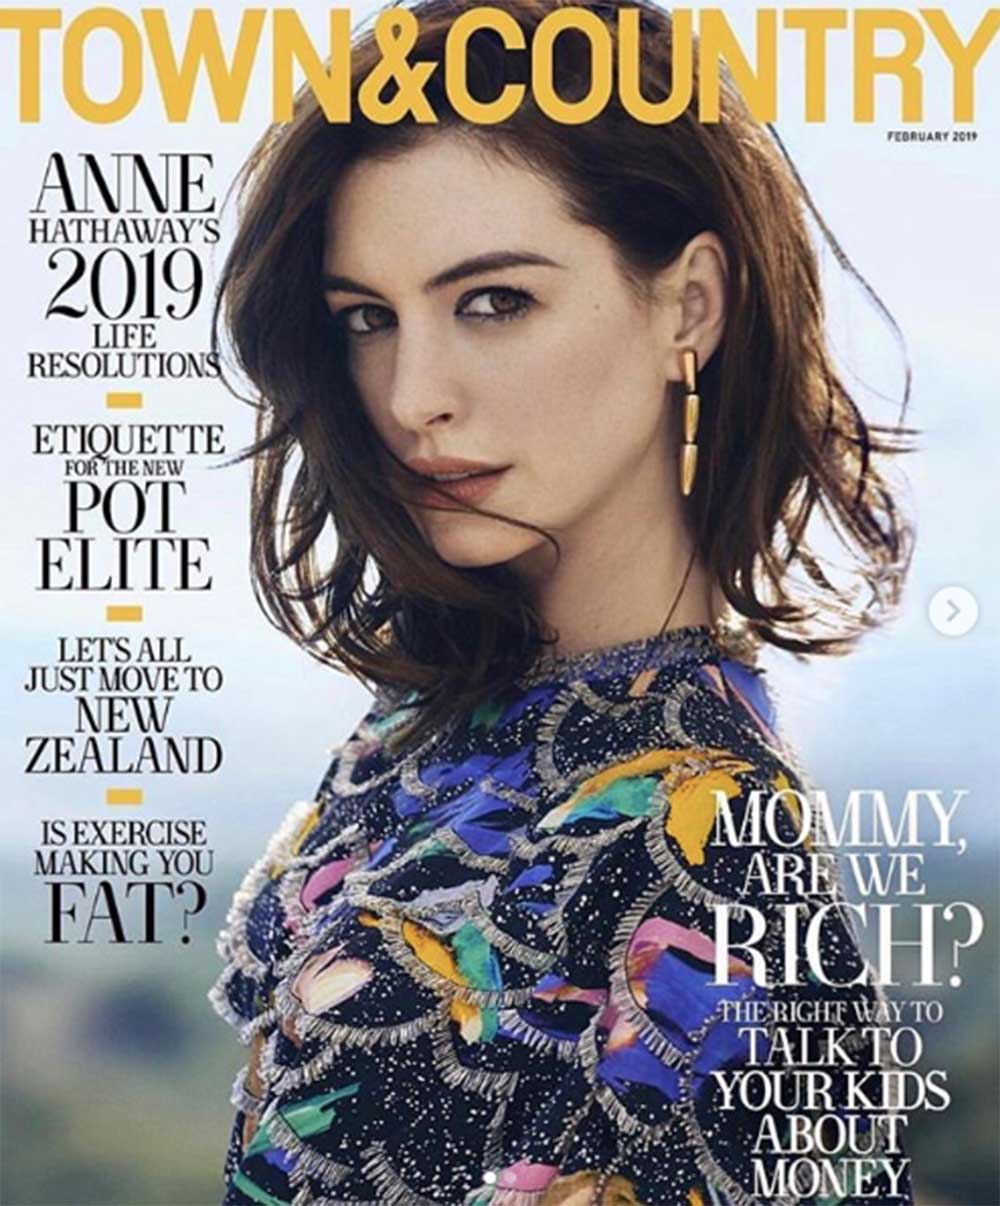 『Town ＆ Country』の表紙を飾ったアン・ハサウェイ（画像は『Anne Hathaway　2019年1月8日付Instagram「What a fun week this is turning out to be!」』のスクリーンショット）